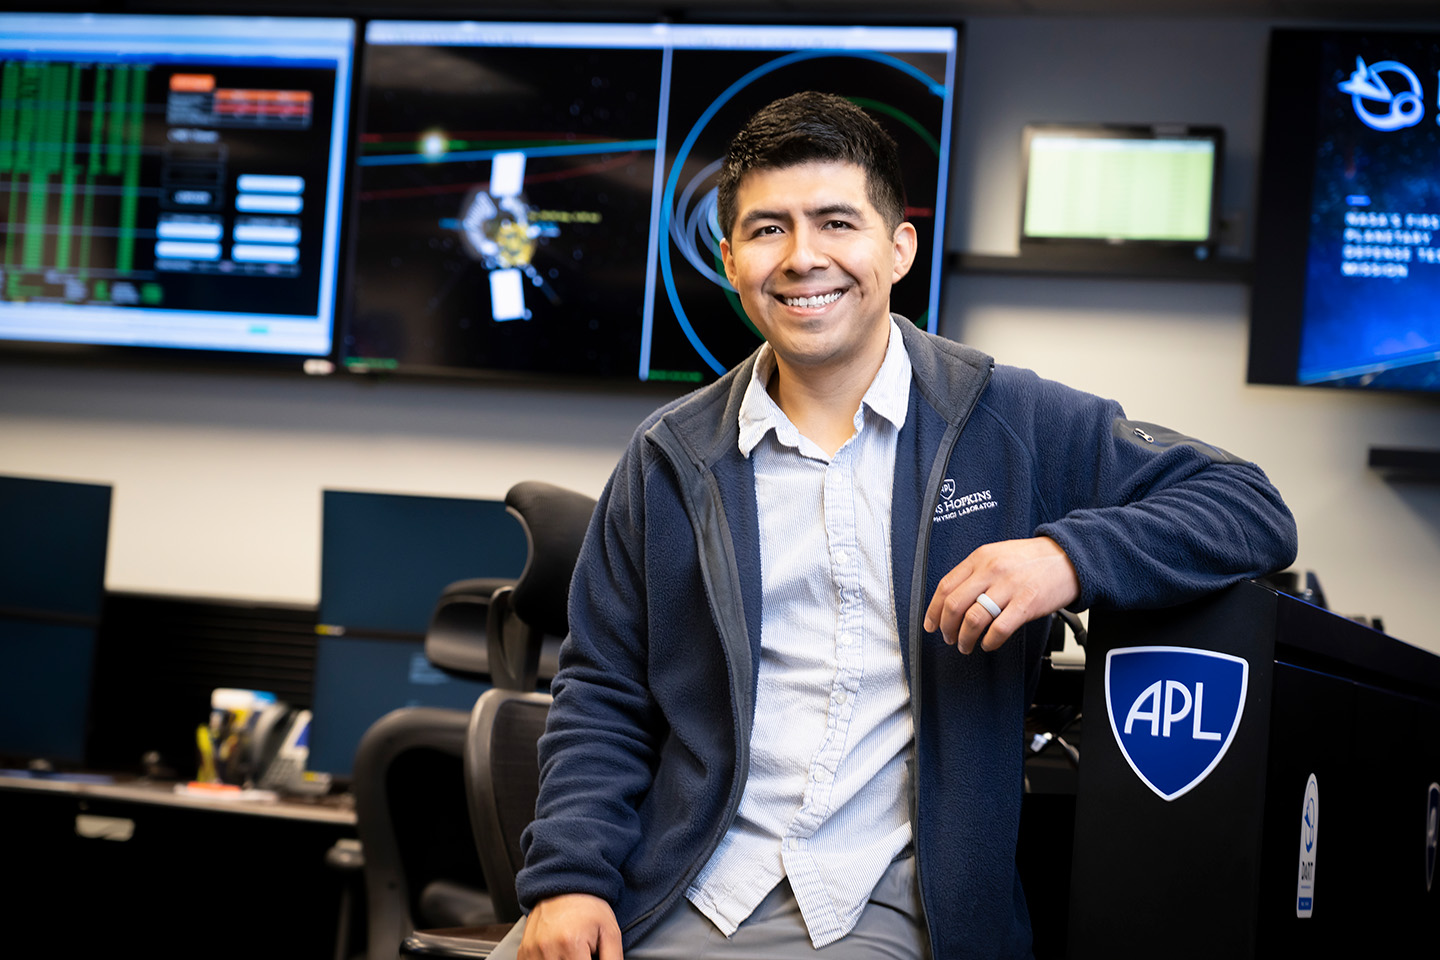 A man wearing a collared shirt and blue fleece jacket with the logo "Johns Hopkins Applied Physics Laboratory" on it sits in a room full of computers and TV screens, with stickers of the APL shield on some of them.